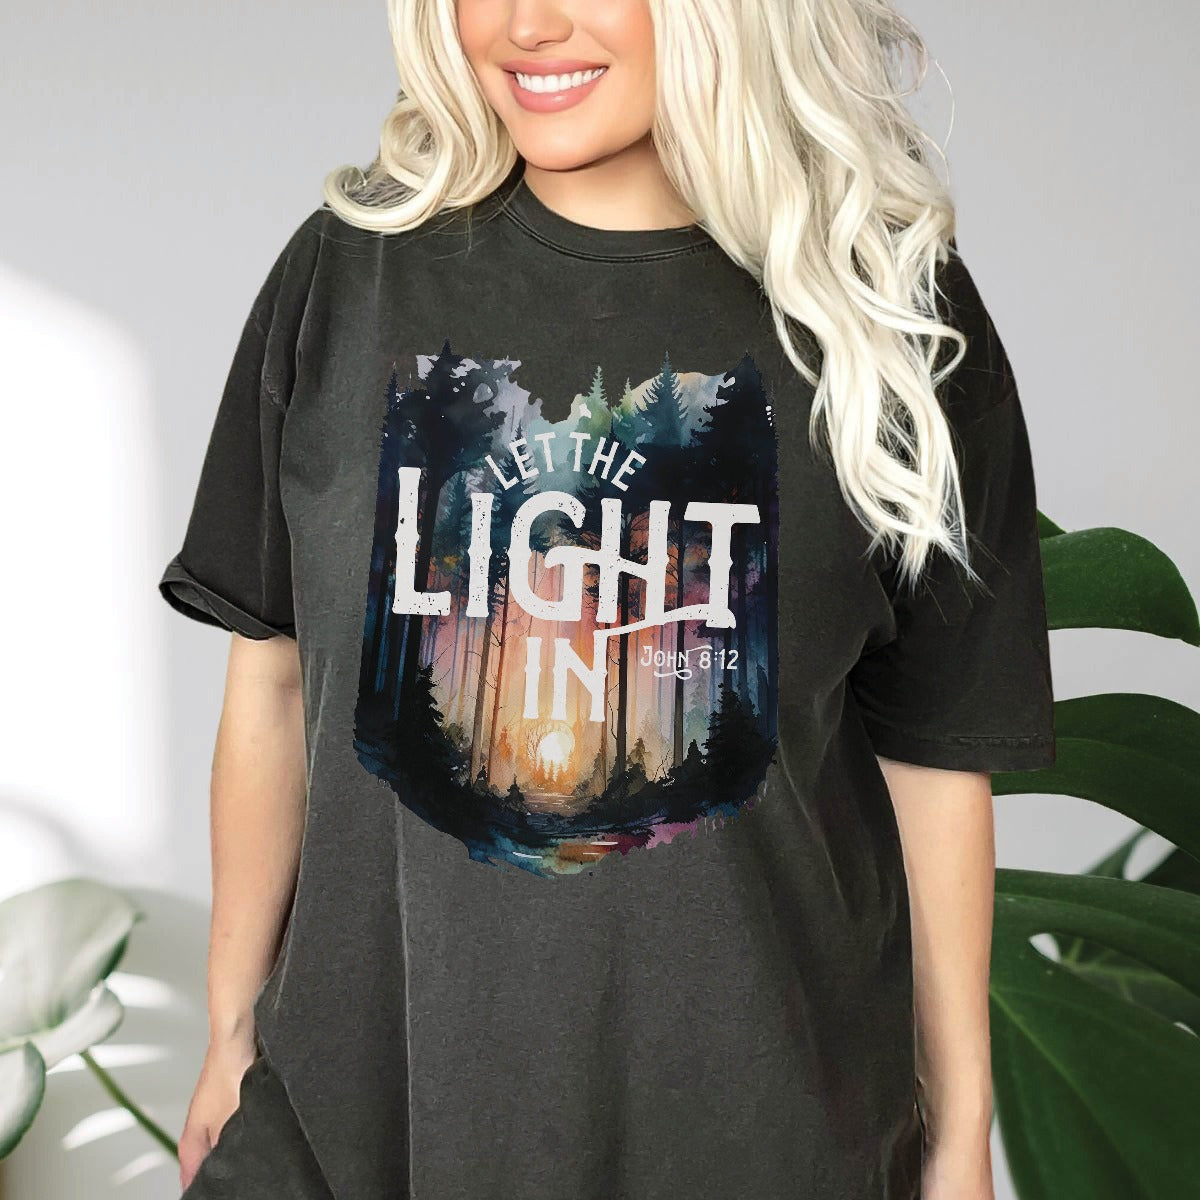 Beautiful young lady wearing trendy oversized Pepper distressed black Comfort Colors C1717 unisex faith-based Christian t-shirt with "Let the Light In" John 8:12 bible verse and watercolor moody forest trees scene, designed for men and women